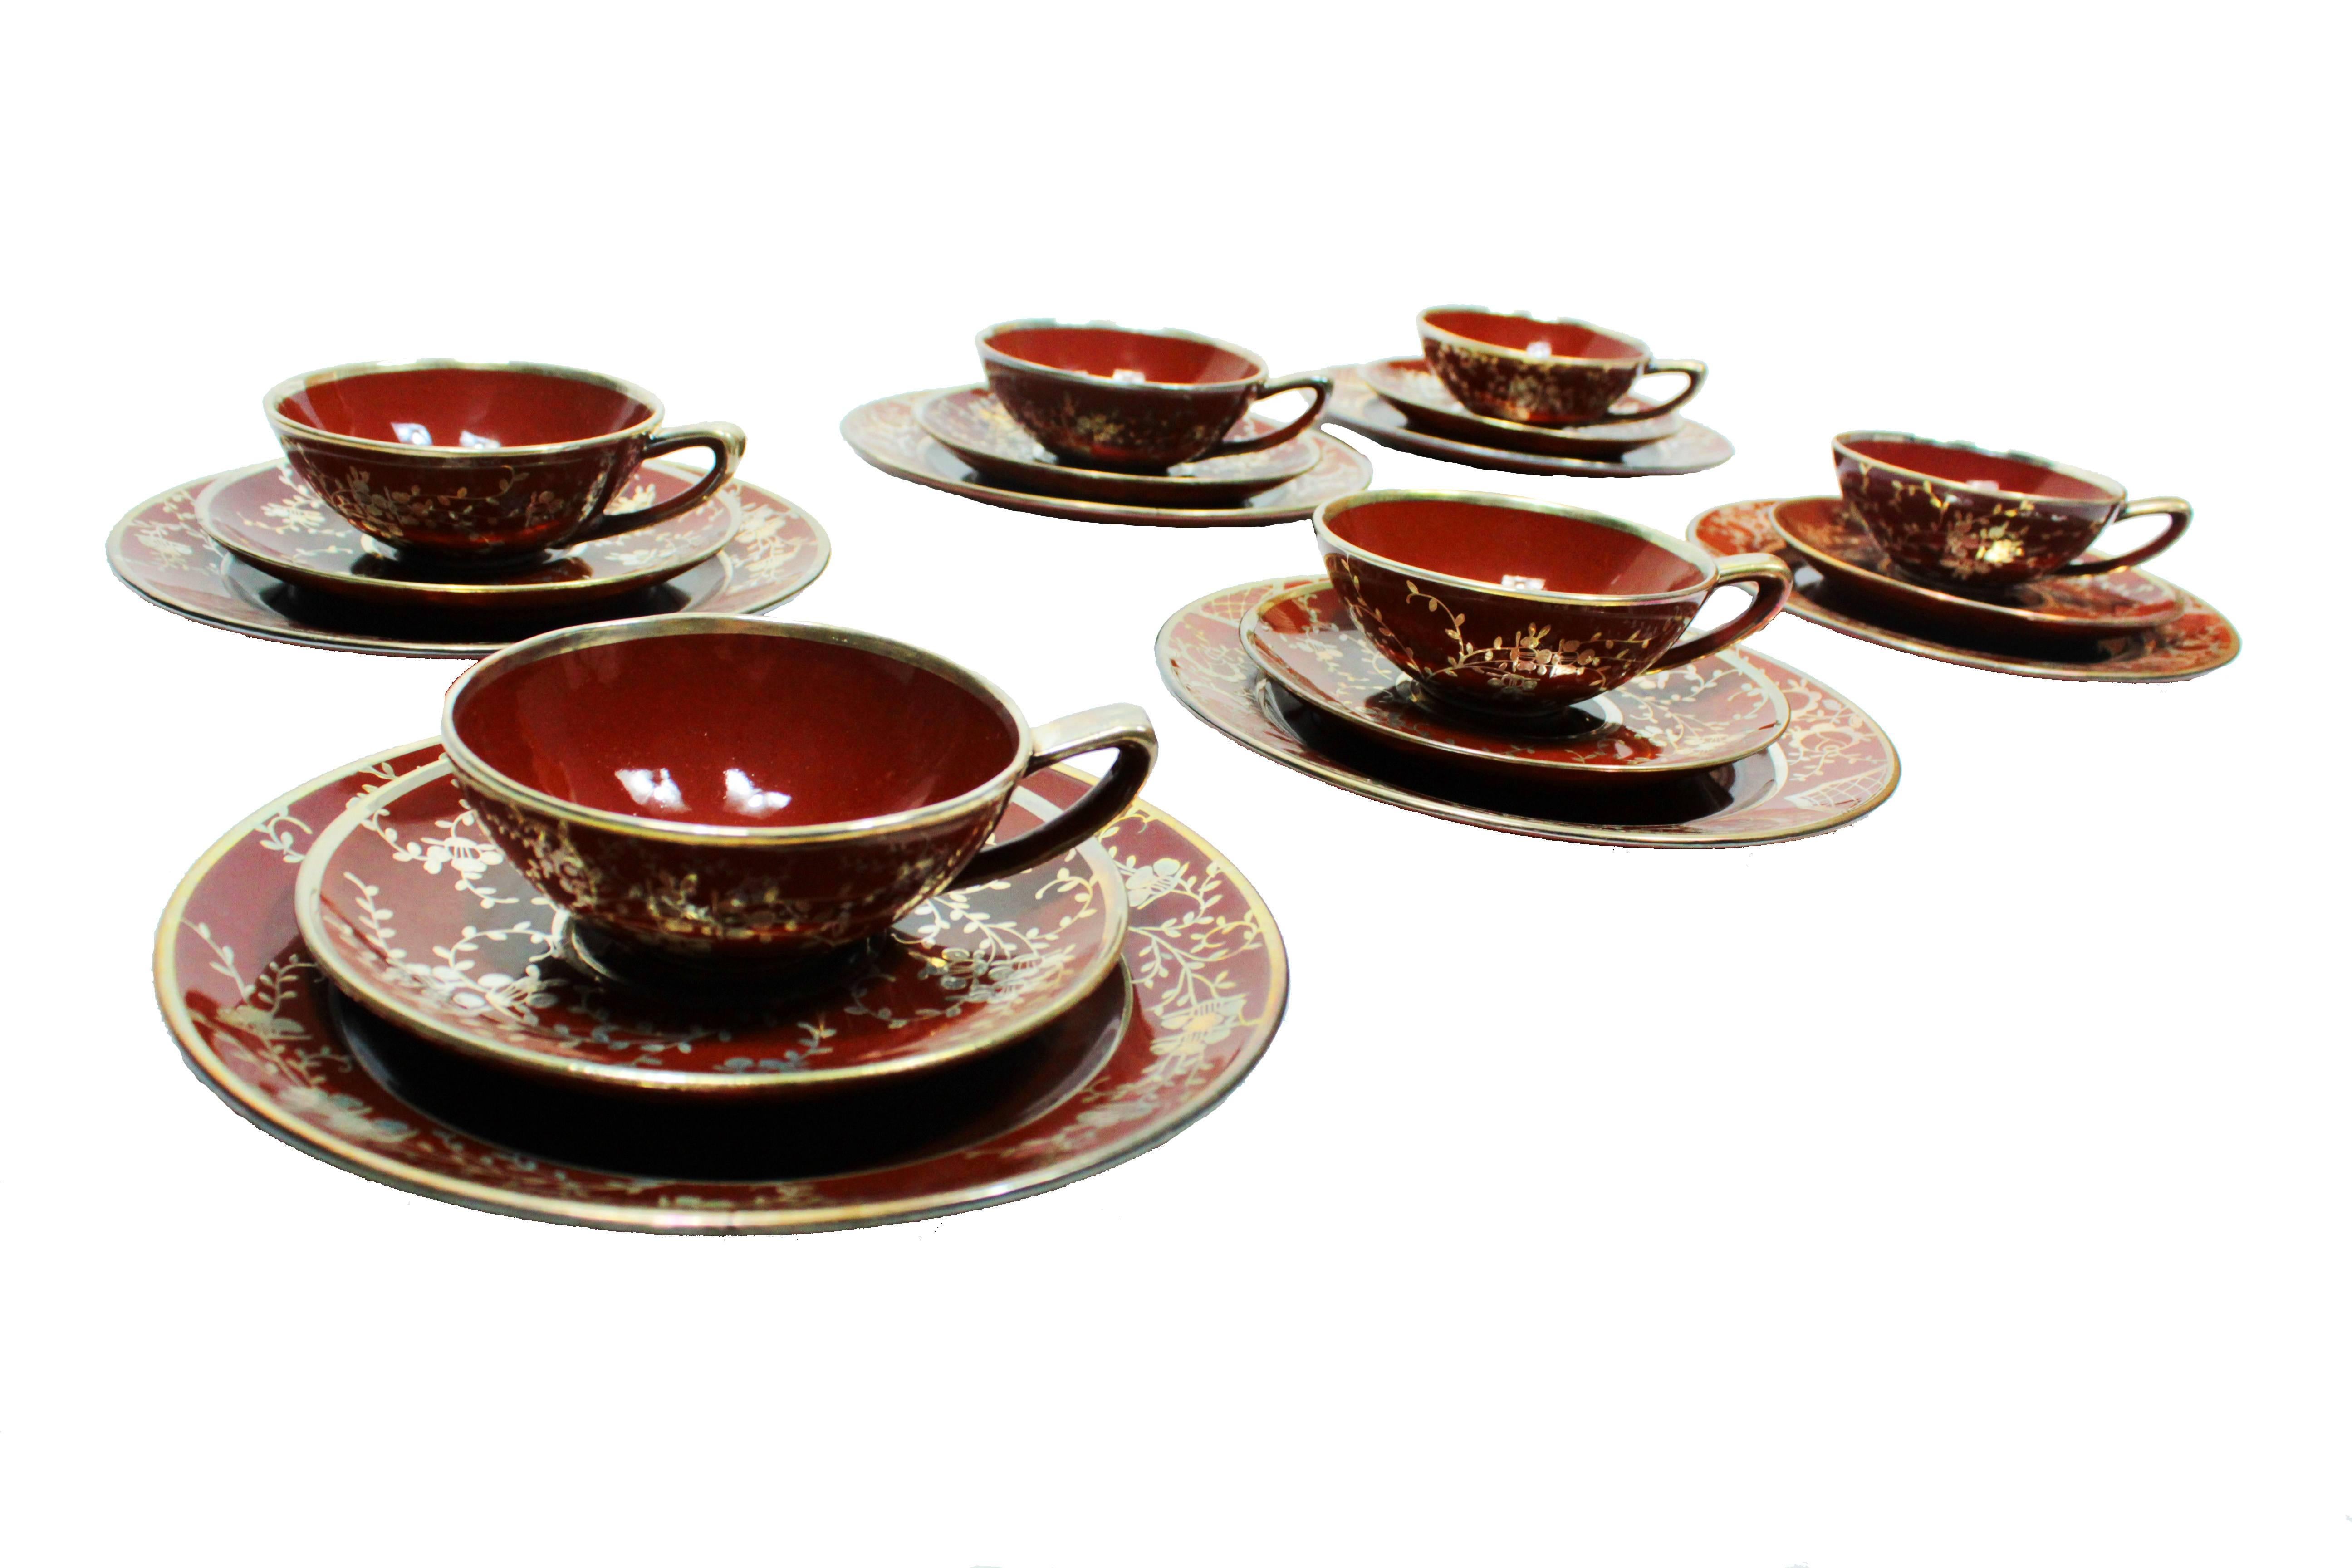 Hand-Painted Ginori Ceramic Tea Set with Dessert Plates in 925 Silver, 1940s